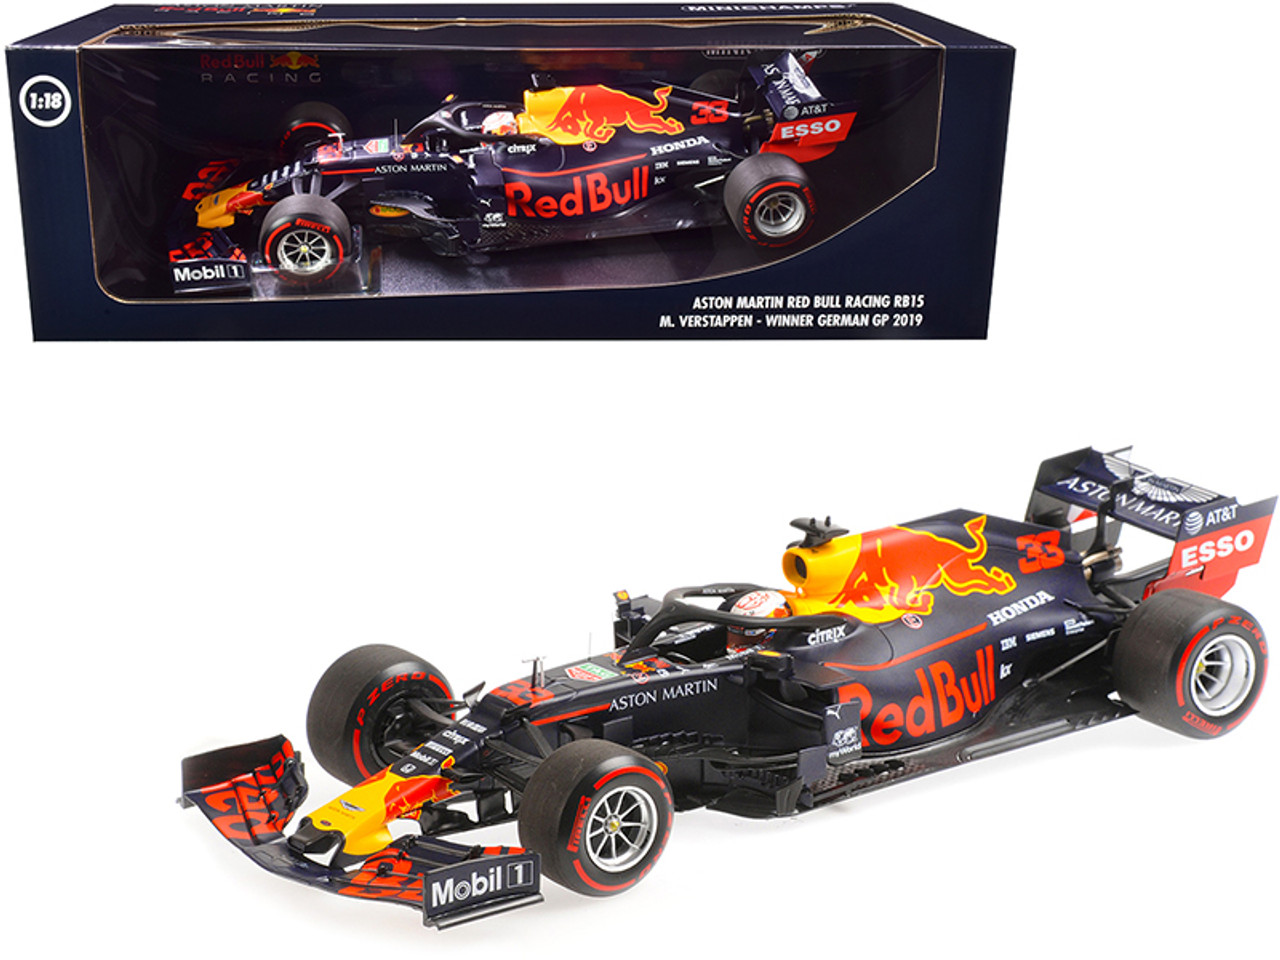 Aston Martin Red Bull Racing Tag Heuer RB15 #33 Max Verstappen Winner Formula One F1 German GP (2019) Limited Edition to 504 pieces Worldwide 1/18 Diecast Model Car by Minichamps